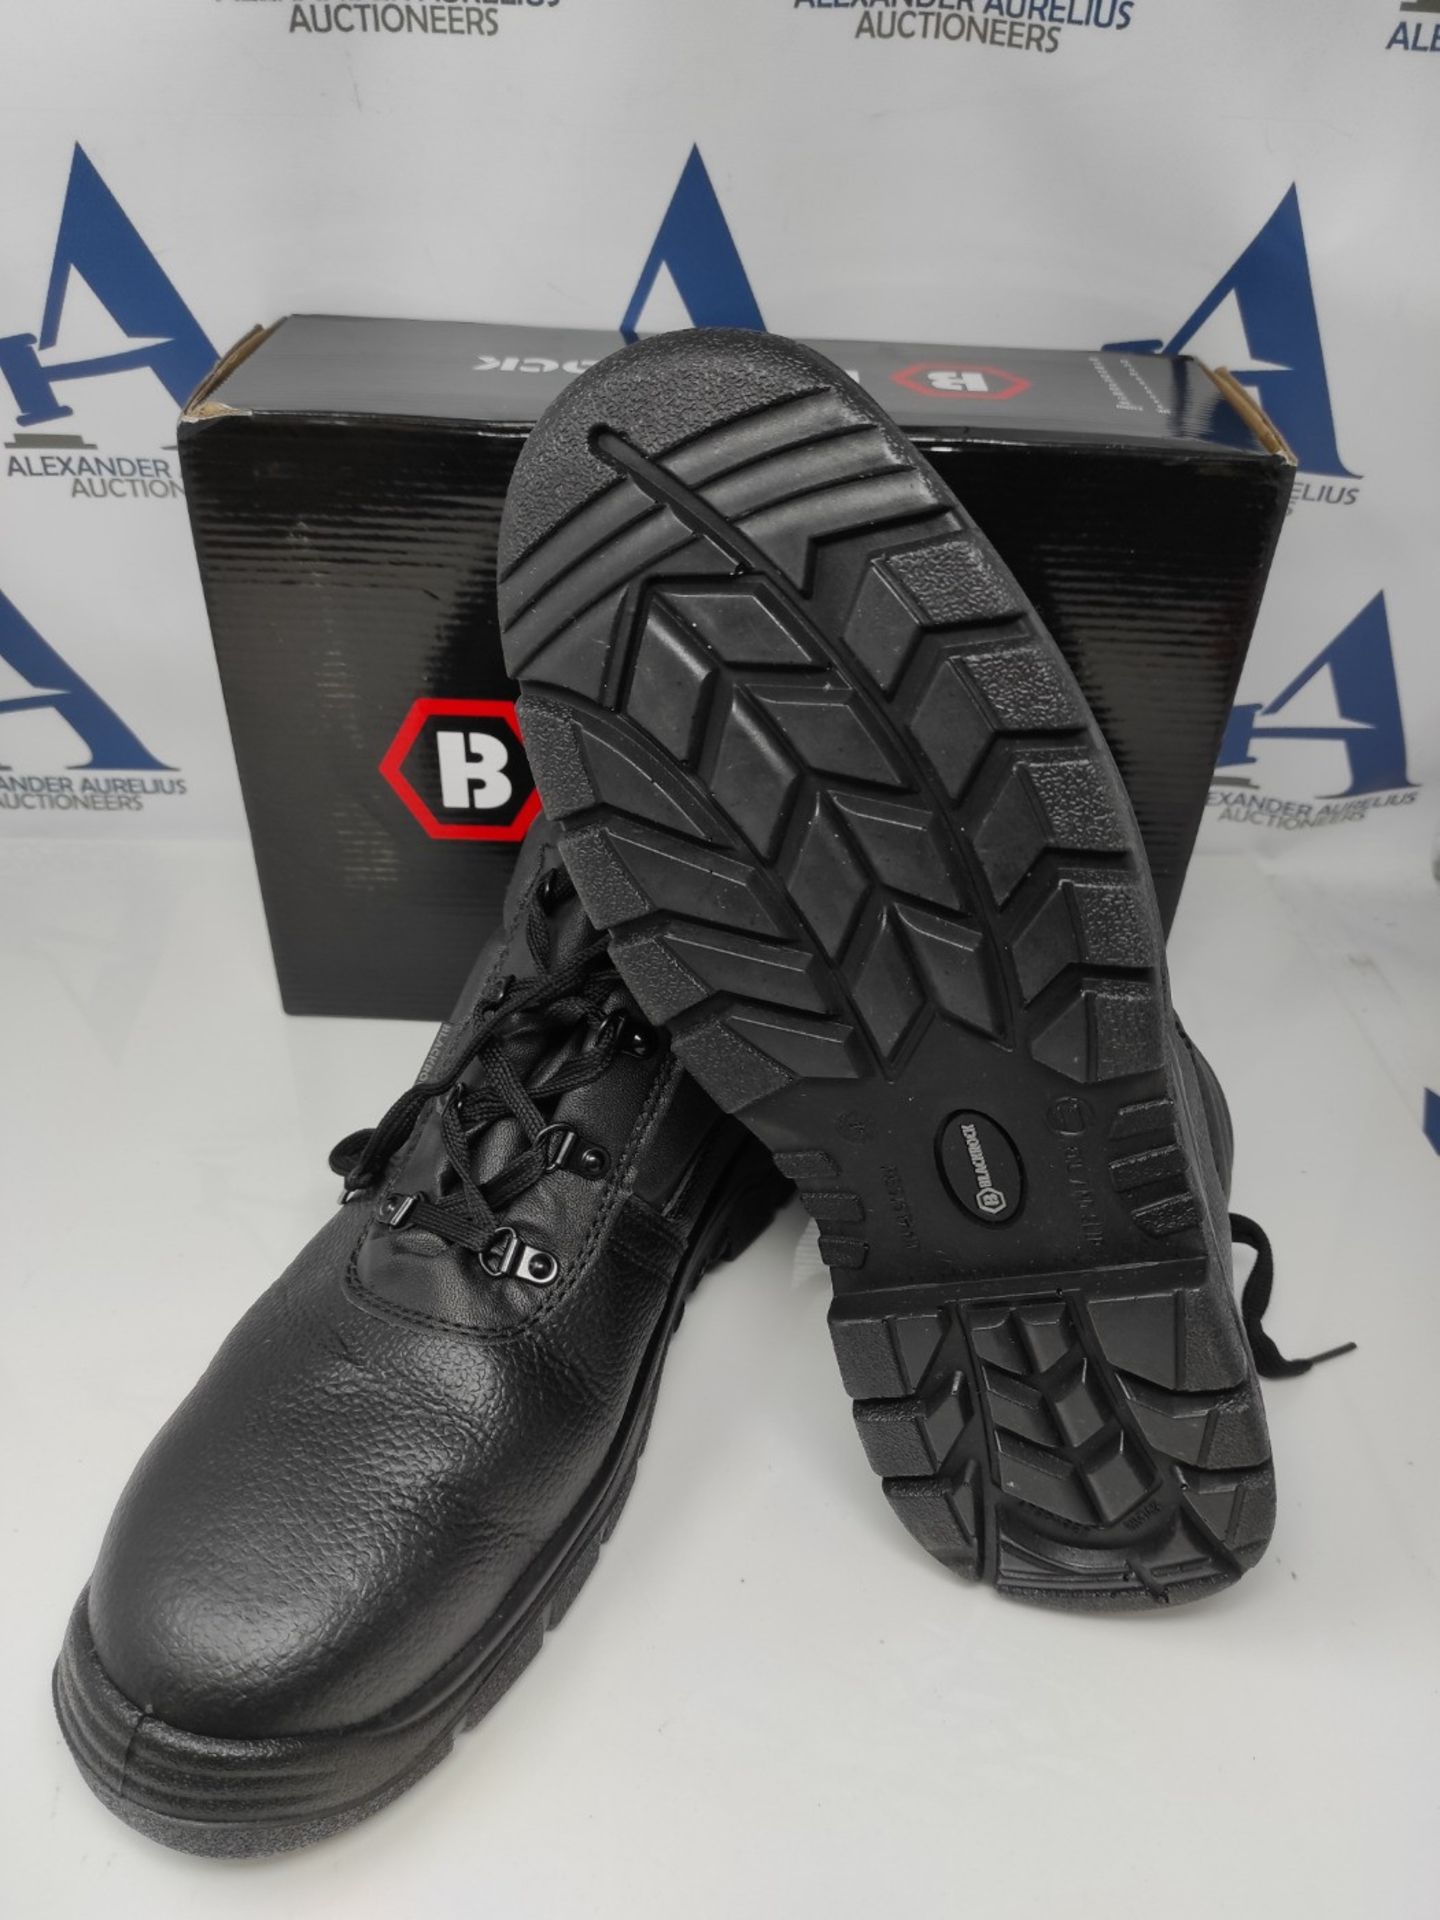 Blackrock Chukka Work Boots, Safety Boots, Safety Shoes Mens Womens, Men's Work & Util - Image 2 of 2